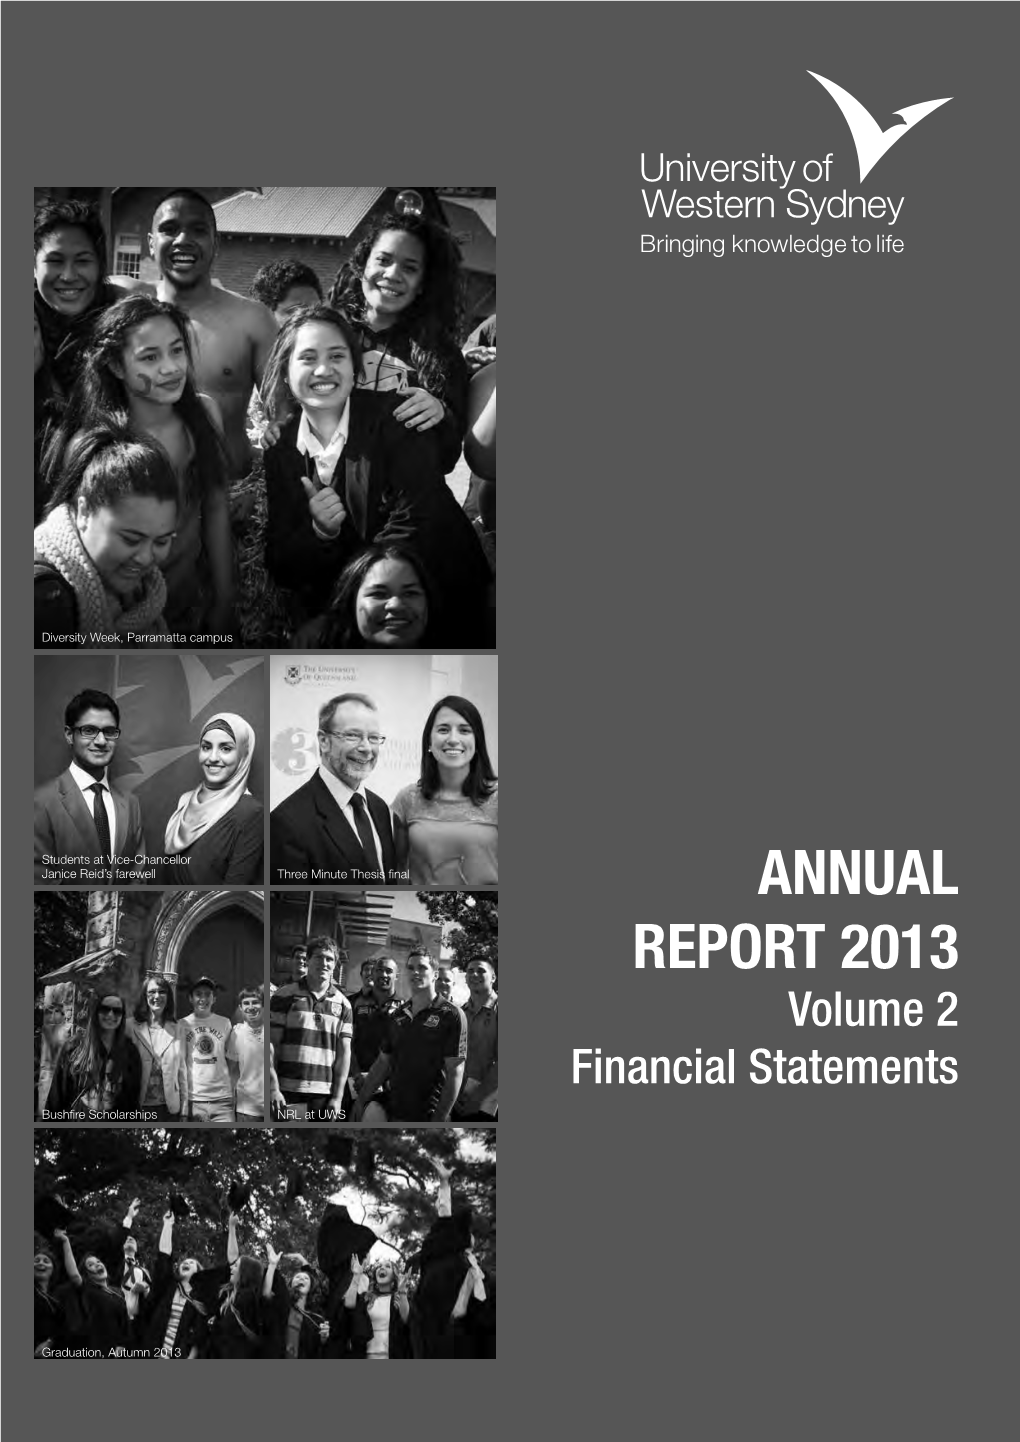 Annual Report 2013 Volume 2 Financial Statements